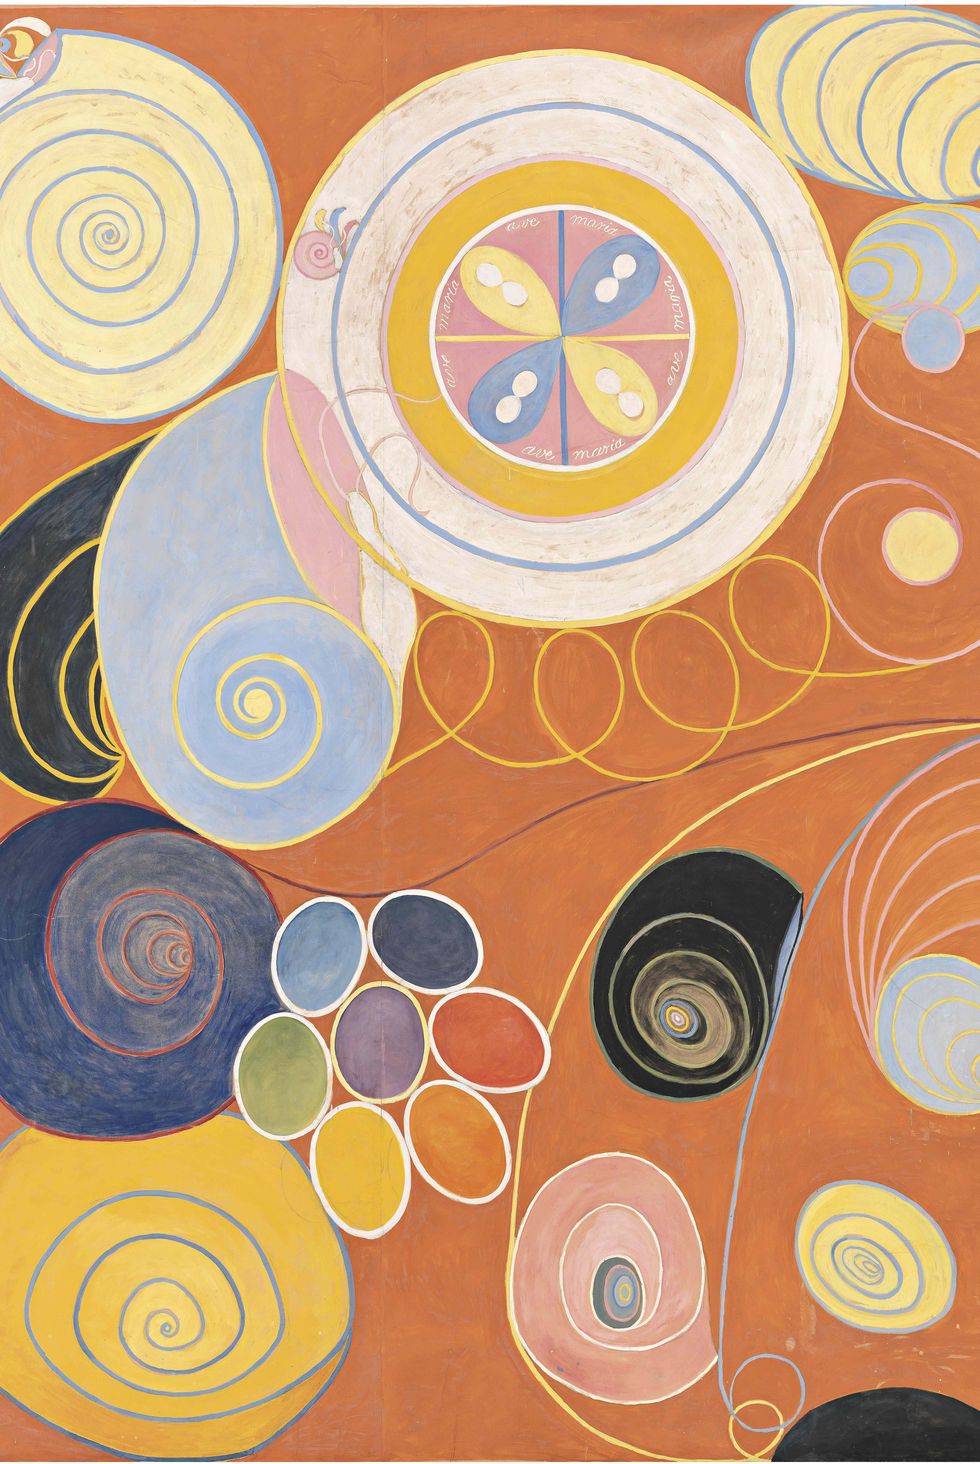 the ten largest, group iv, no 3, youth ﻿by hilma af klint, 1907